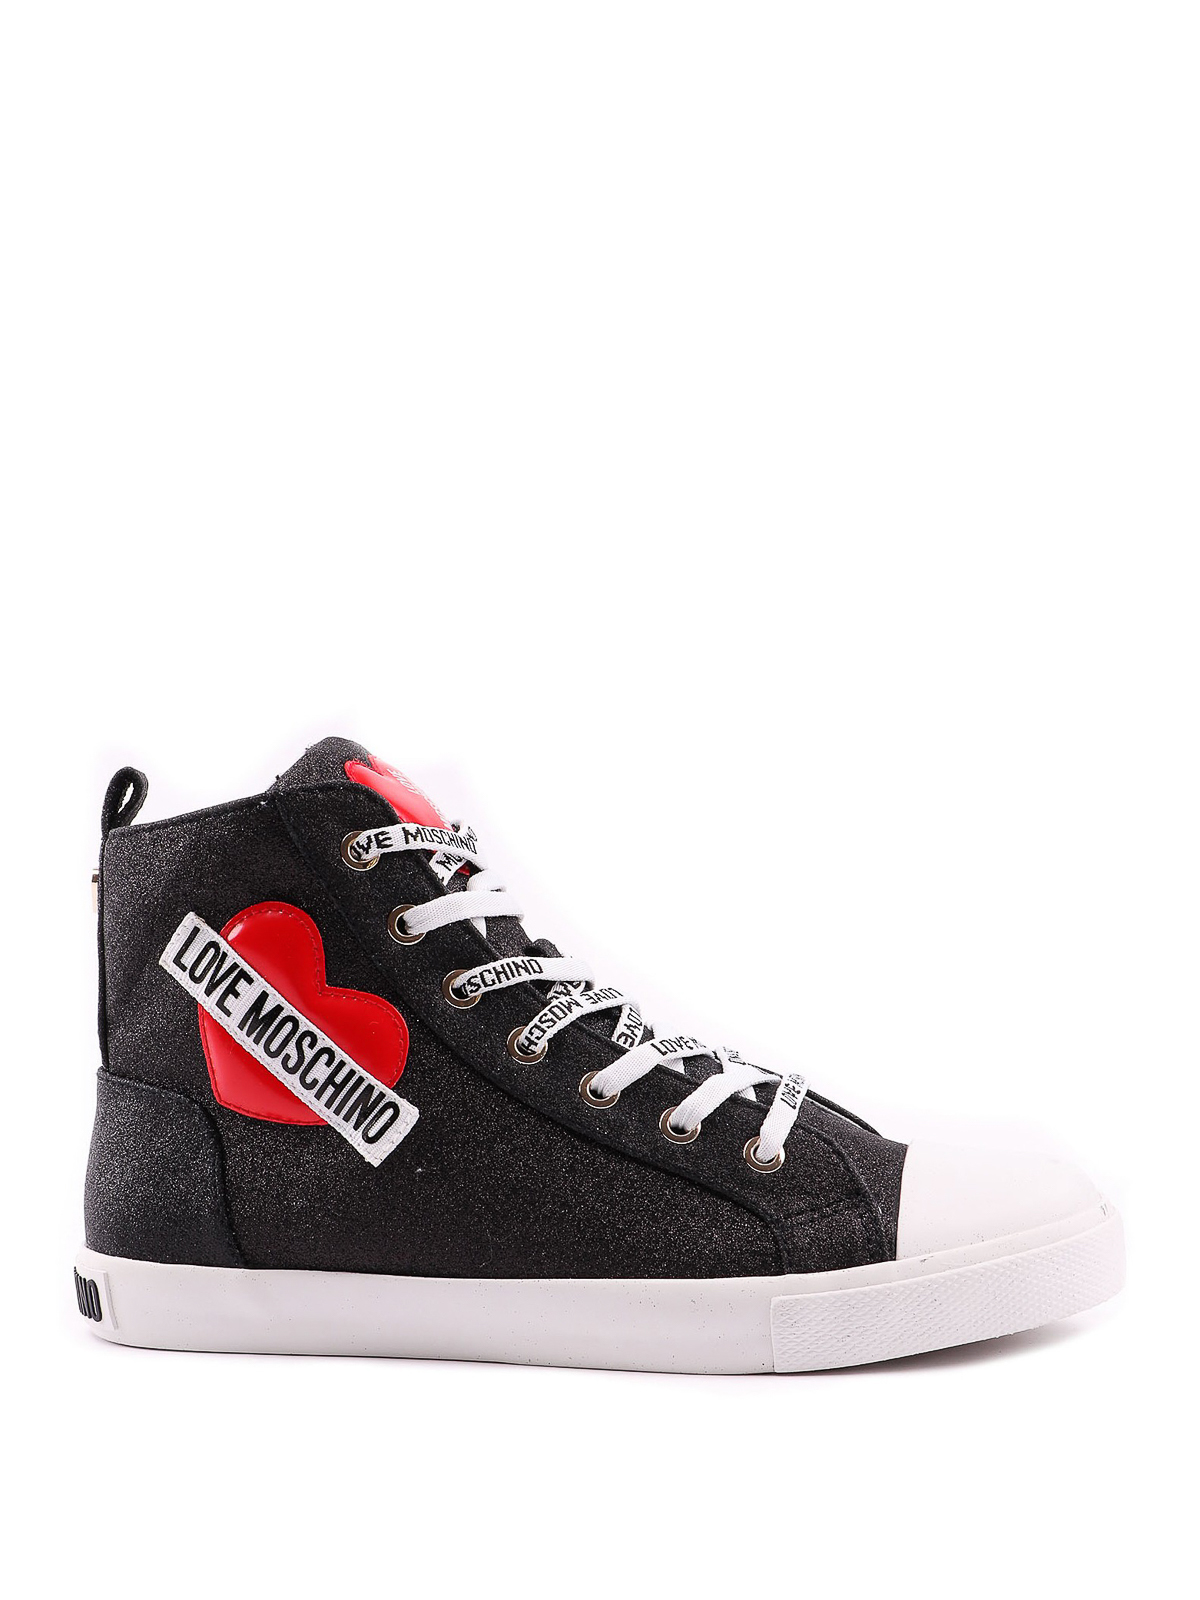 moschino sneakers high top